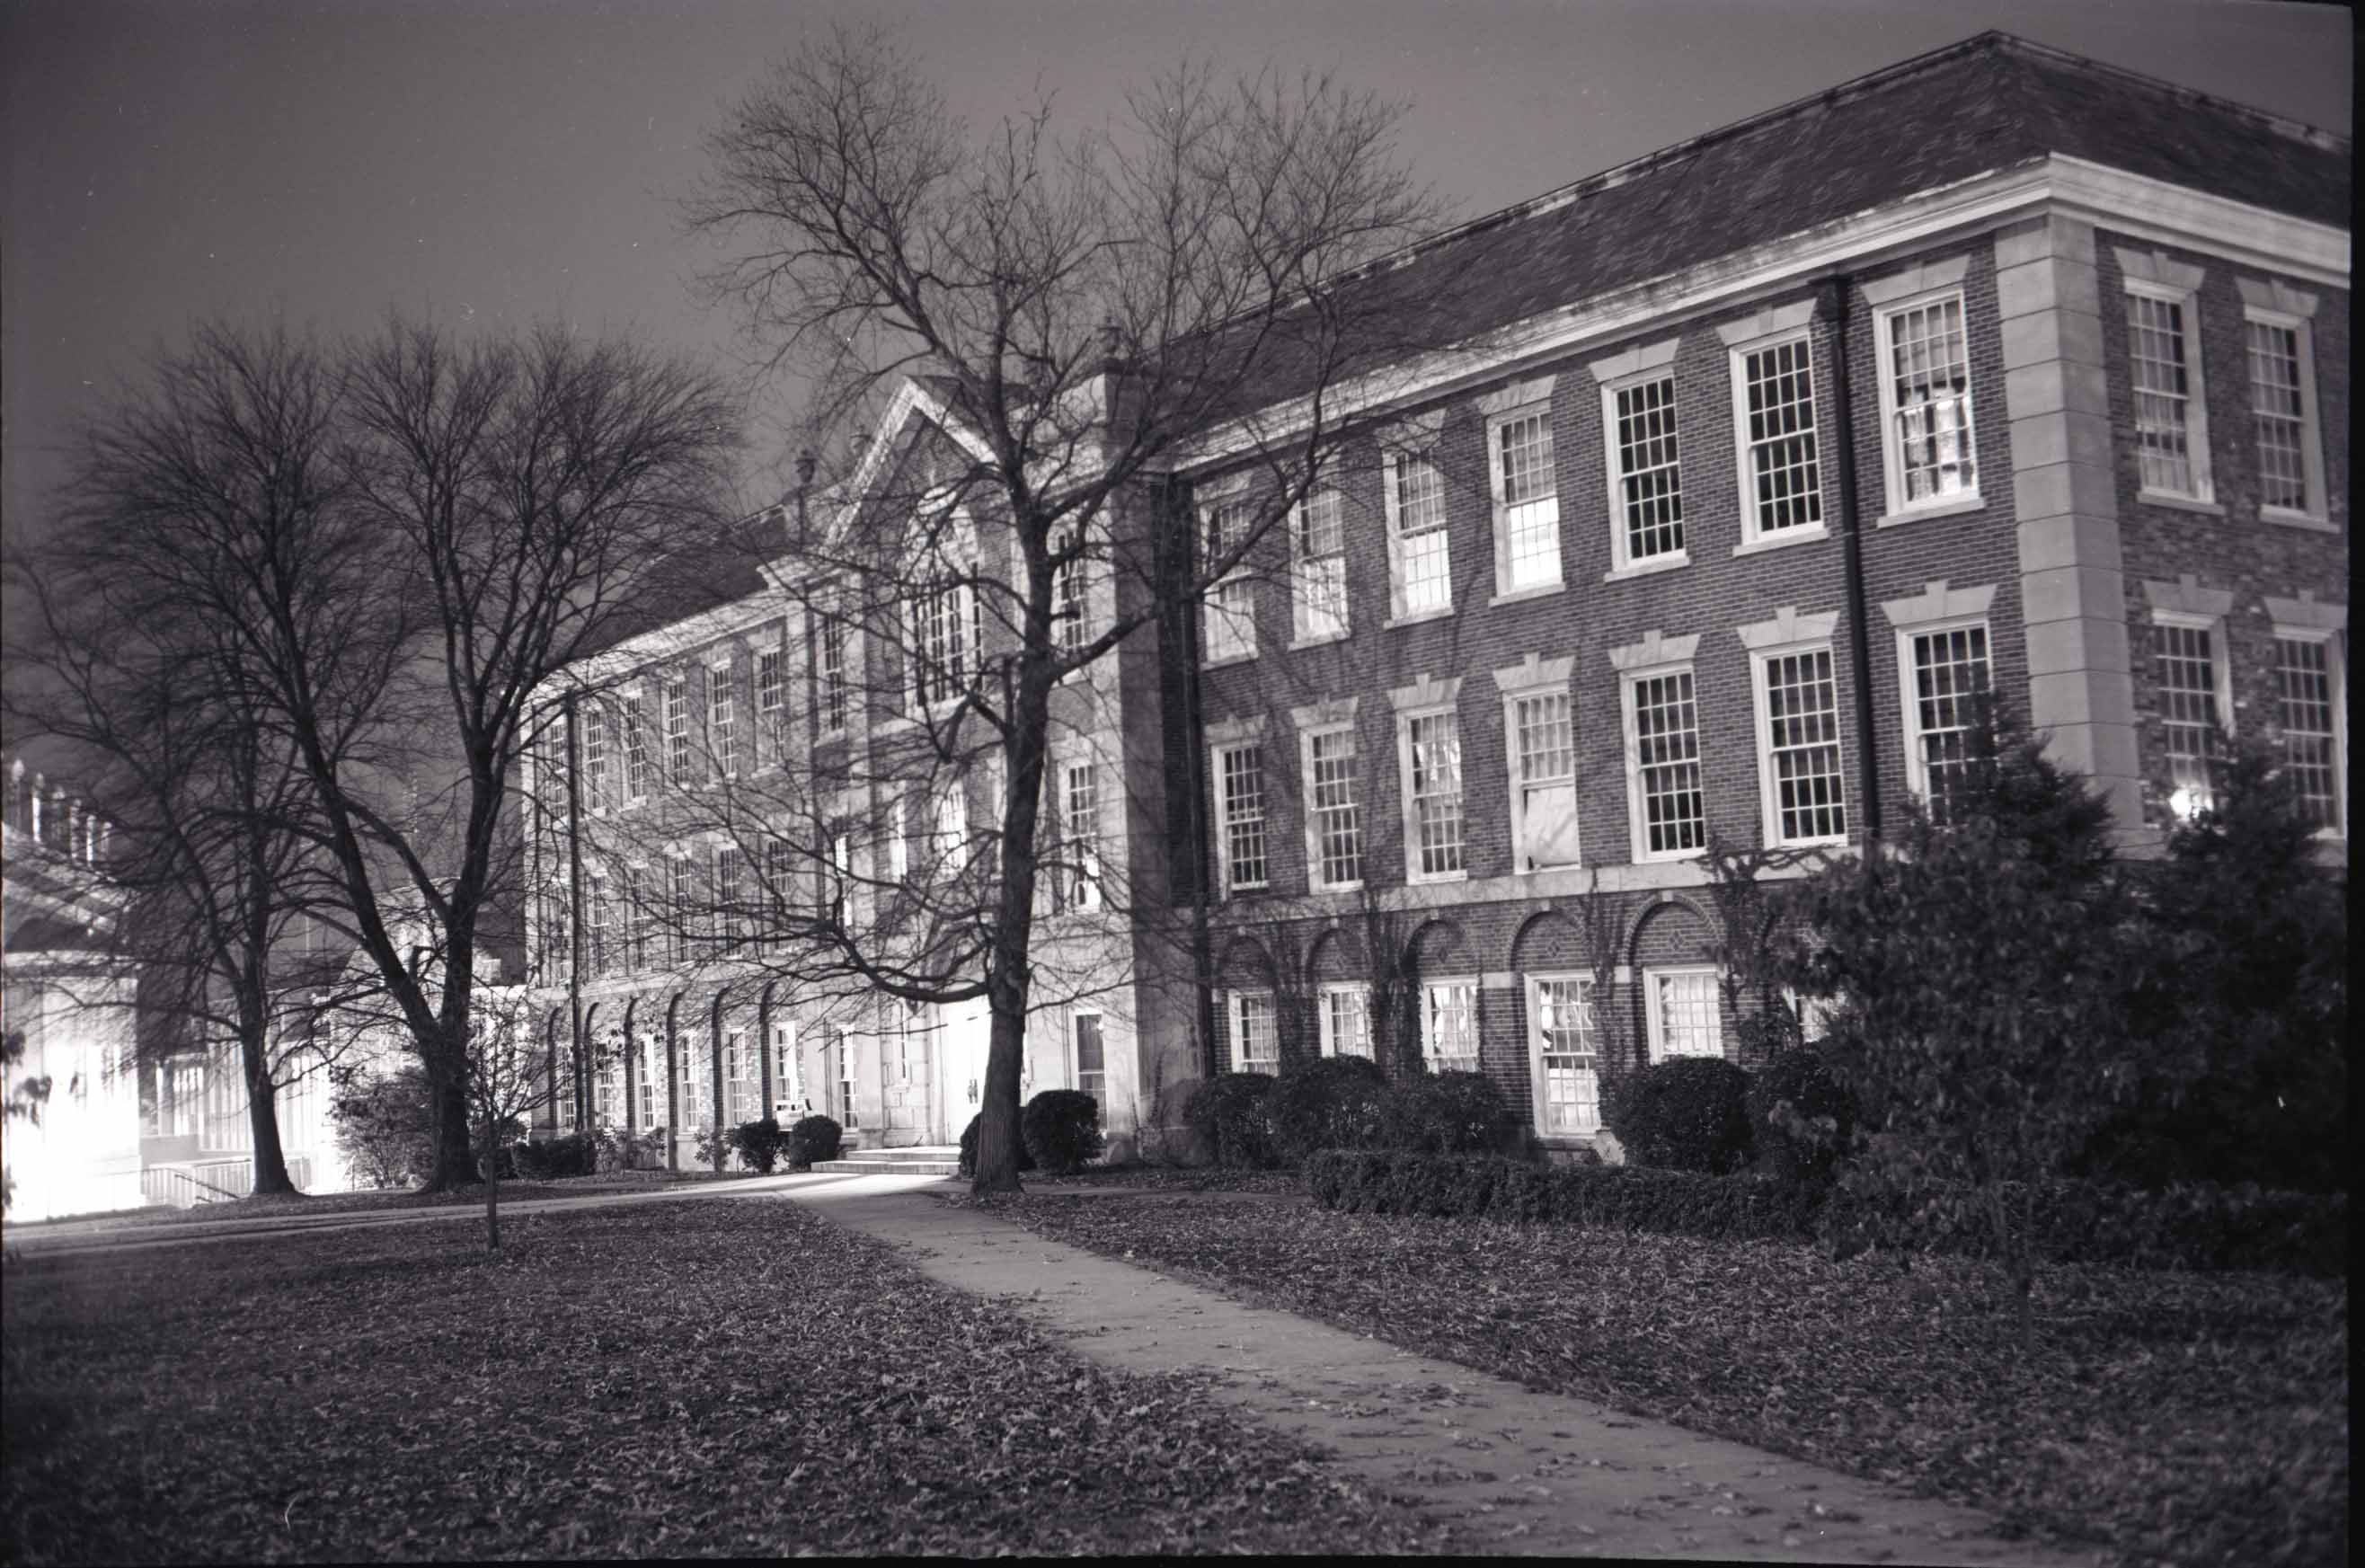 Henderson Hall in 1974